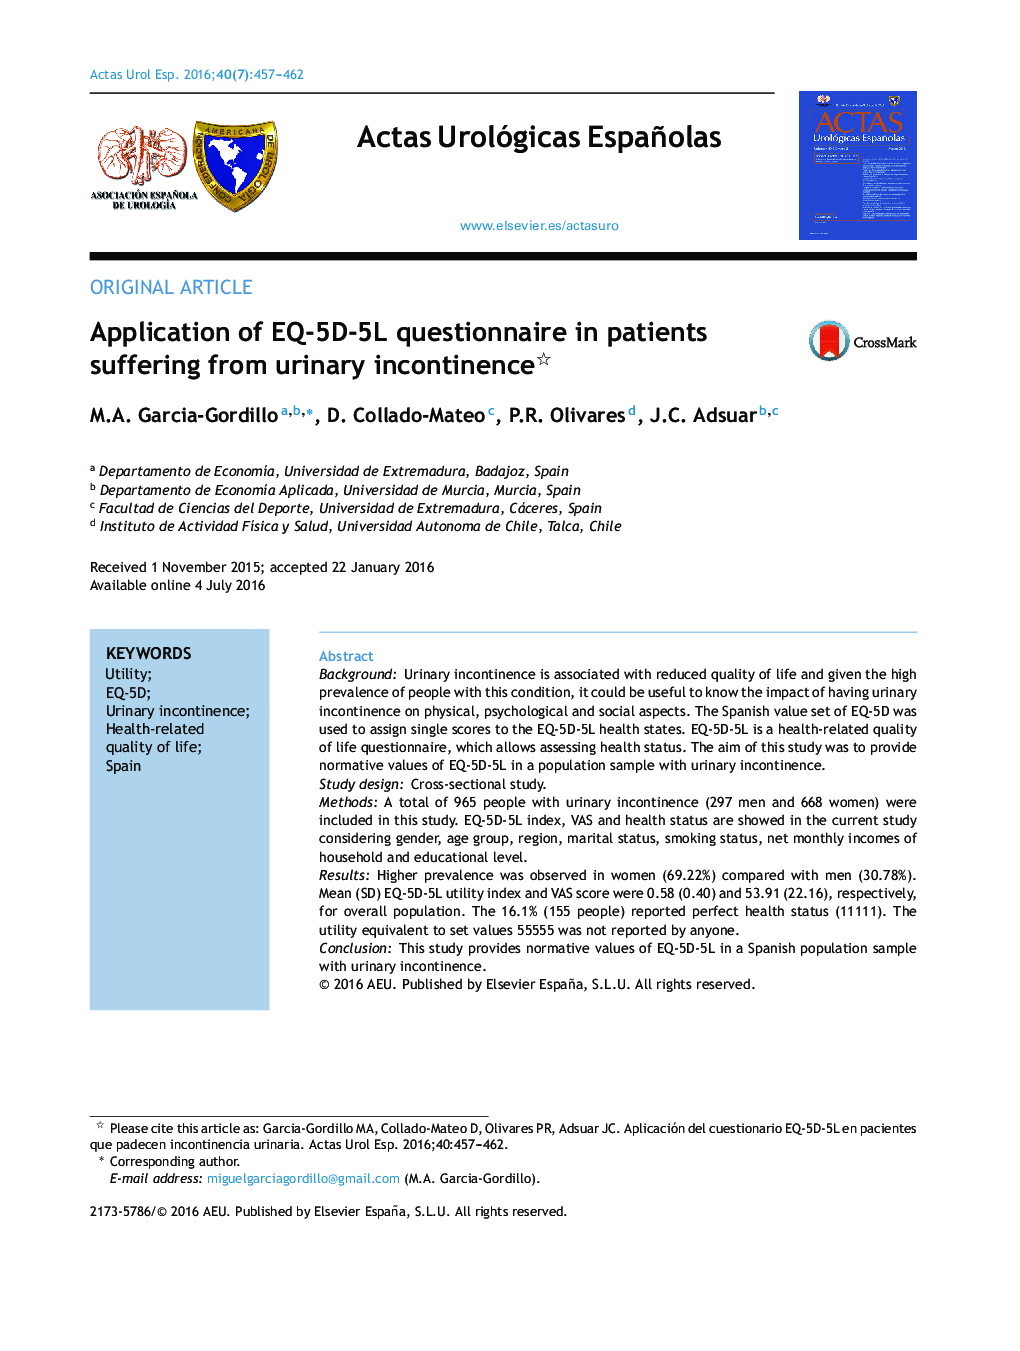 Application of EQ-5D-5L questionnaire in patients suffering from urinary incontinence 